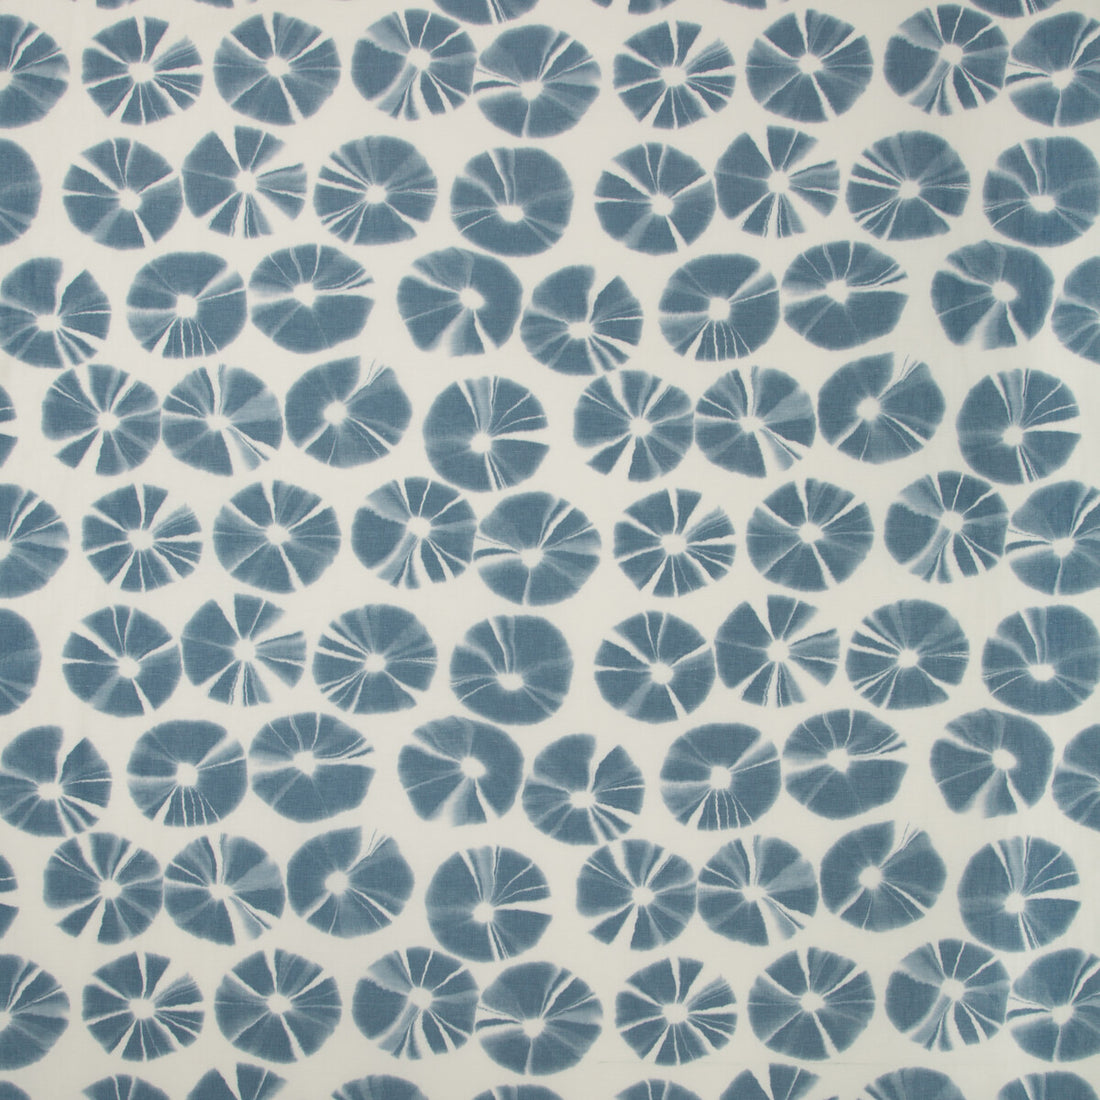 Echino fabric in indigo color - pattern ECHINO.50.0 - by Kravet Couture in the Terrae Prints collection